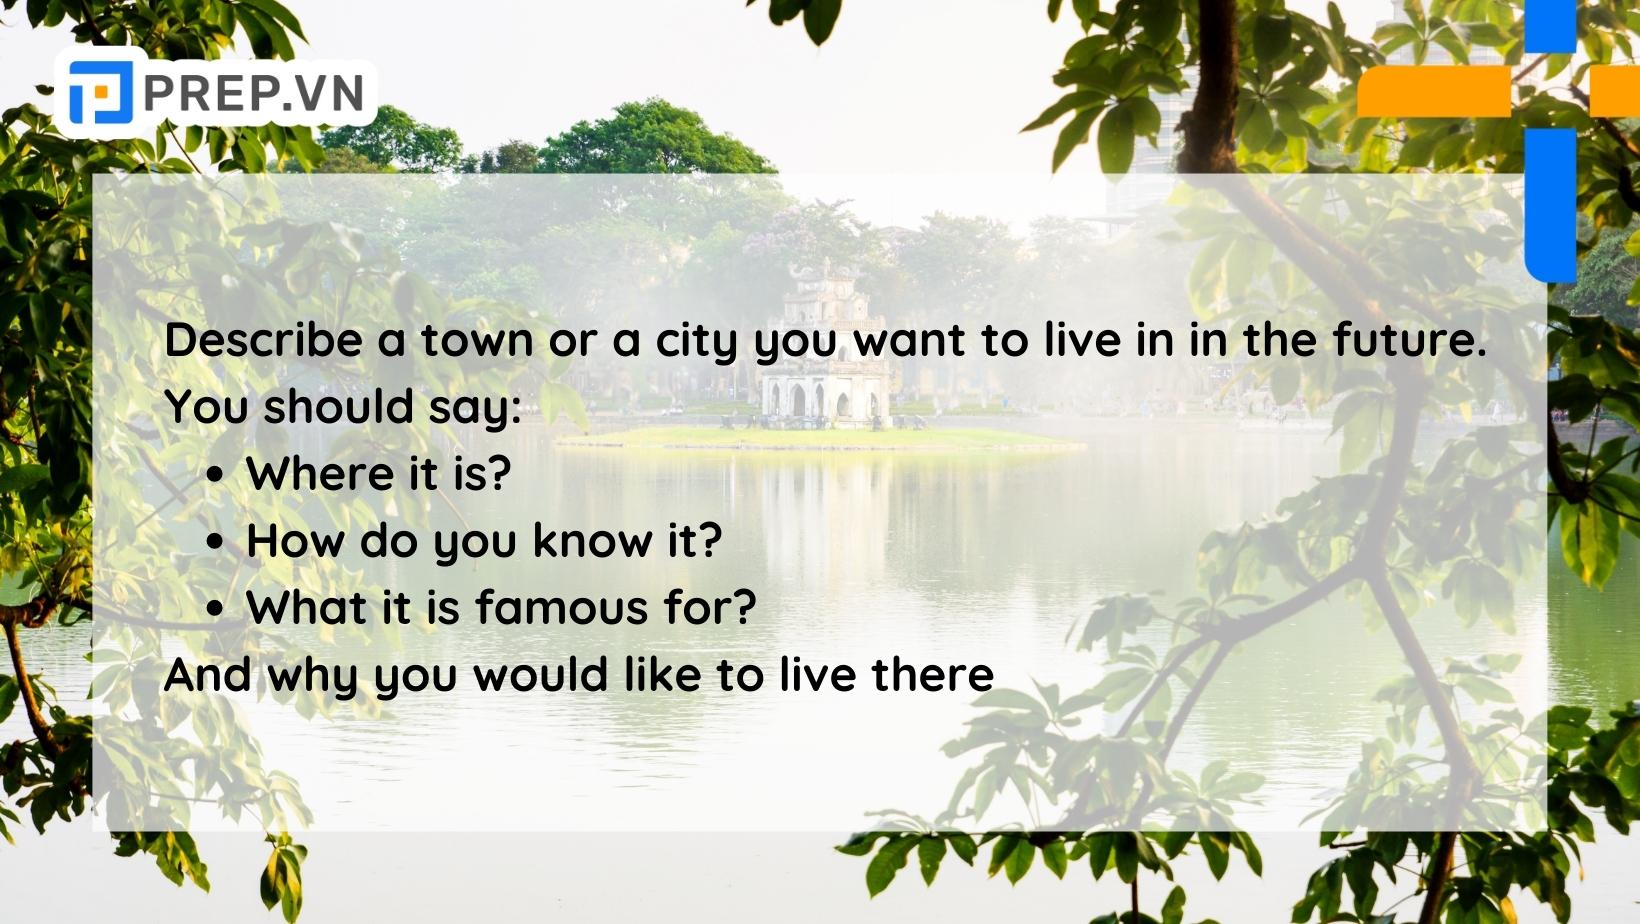 Đề bài: Describe a town or a city you want to live in in the future